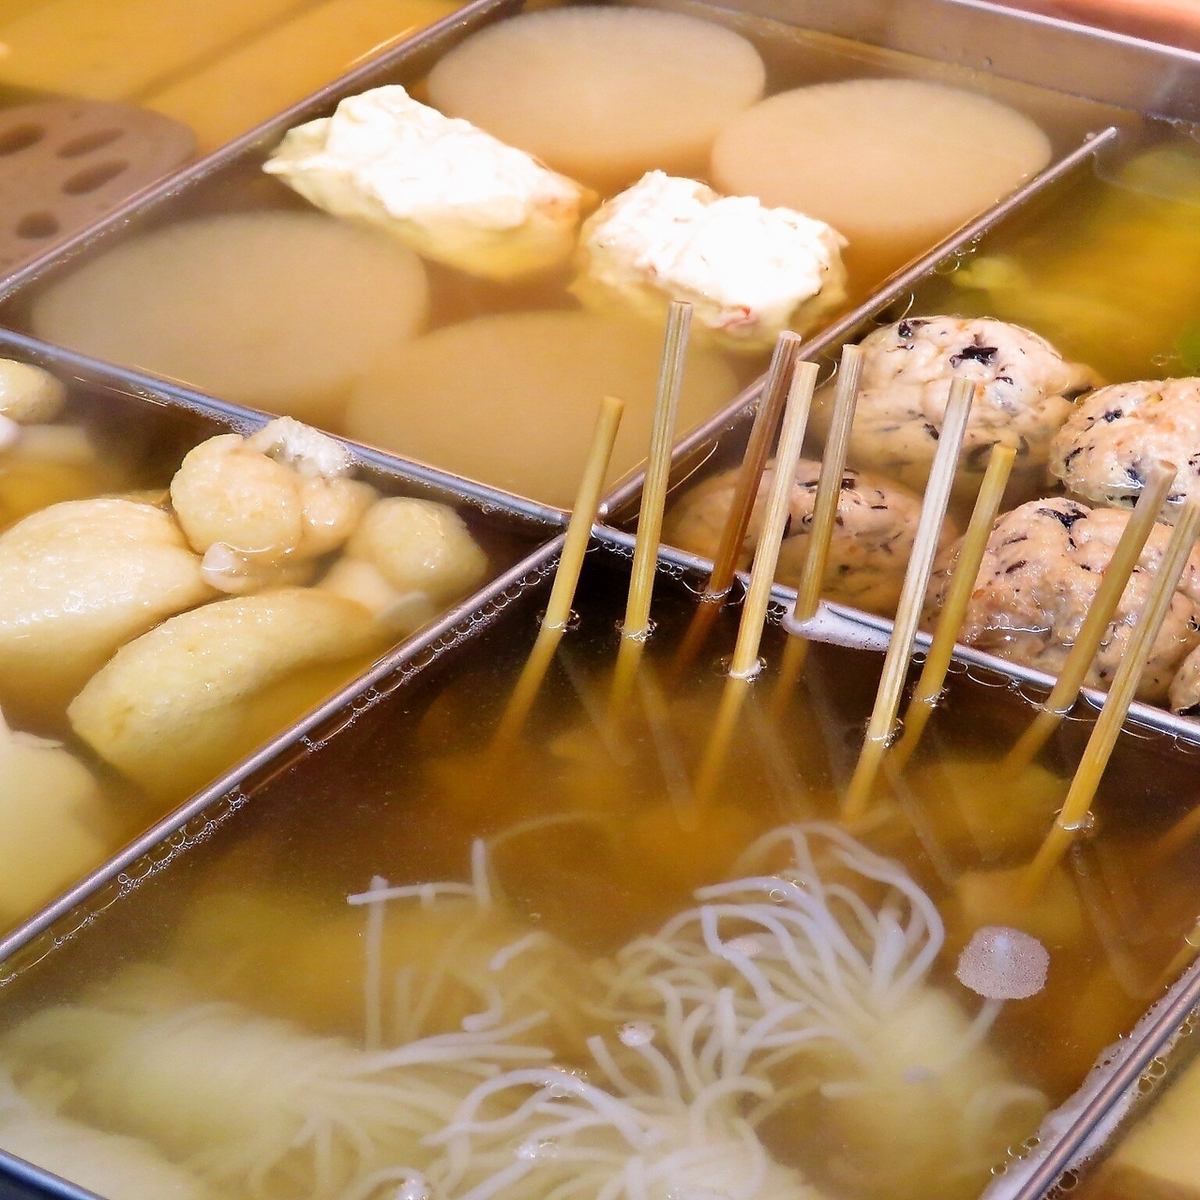 [Kansai-style oden] Enjoy the chef's proud course.